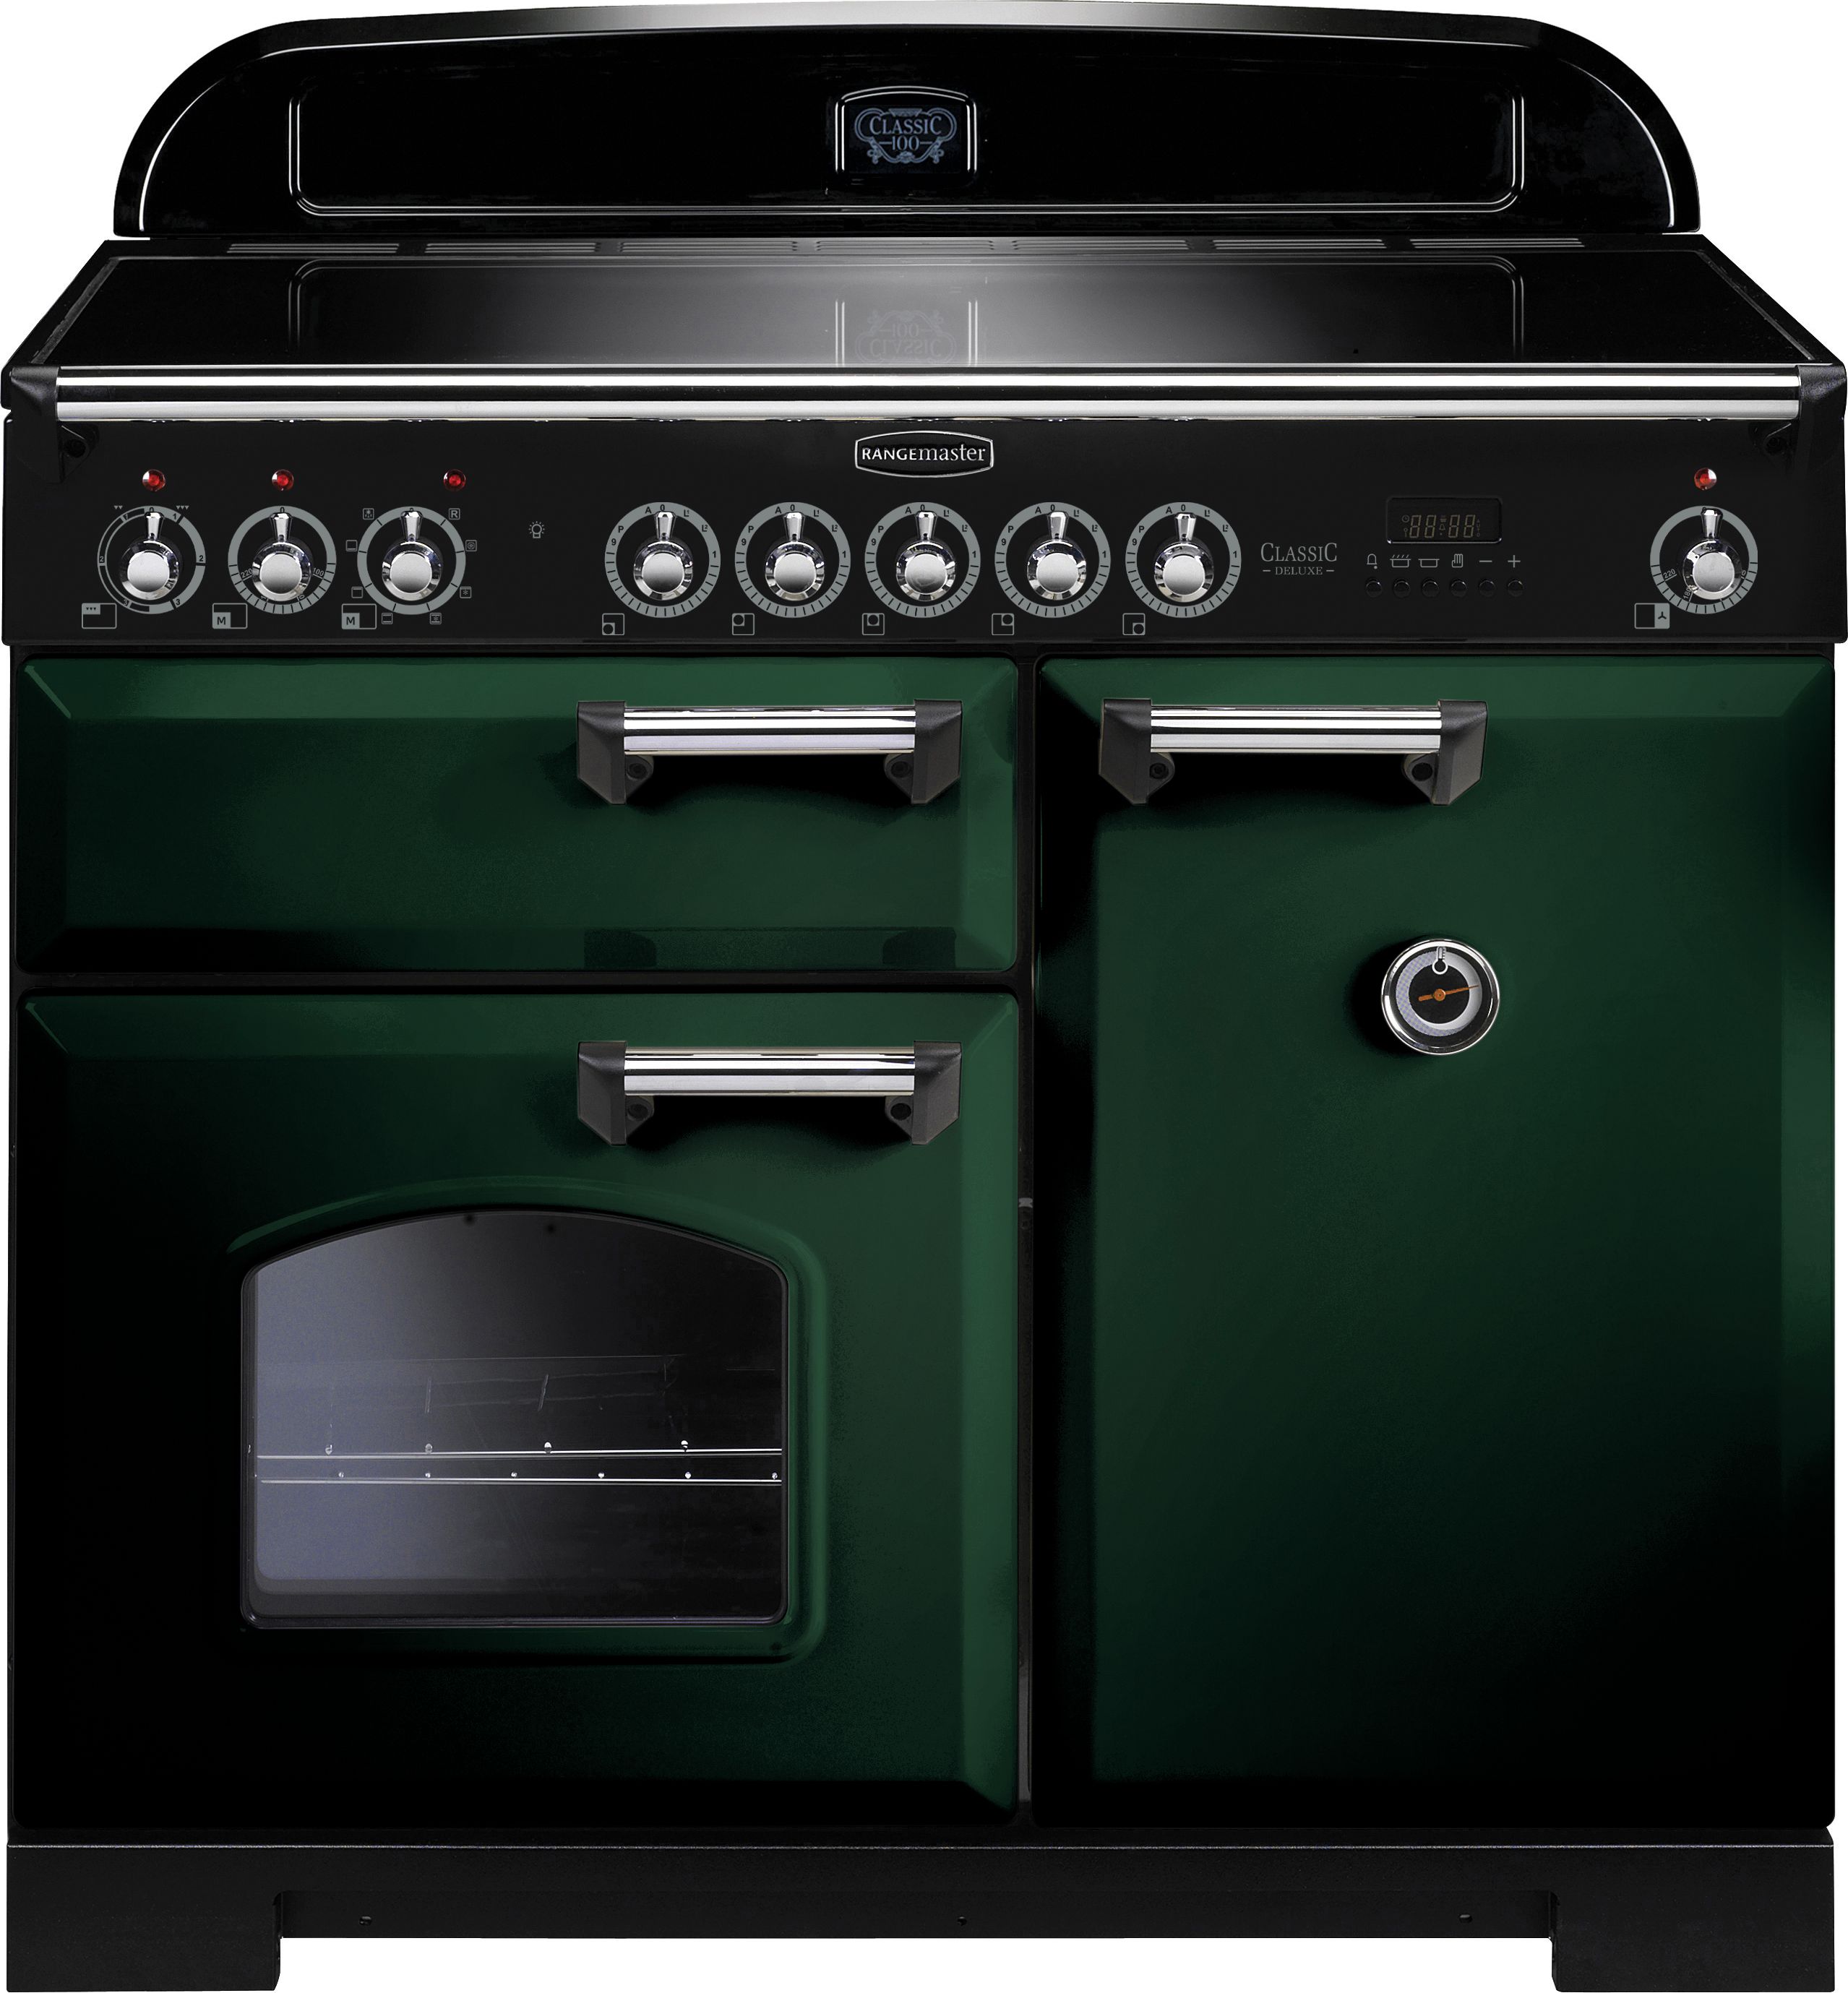 Rangemaster Classic Deluxe CDL100EIRG/C 100cm Electric Range Cooker with Induction Hob - Racing Green / Chrome - A/A Rated, Green